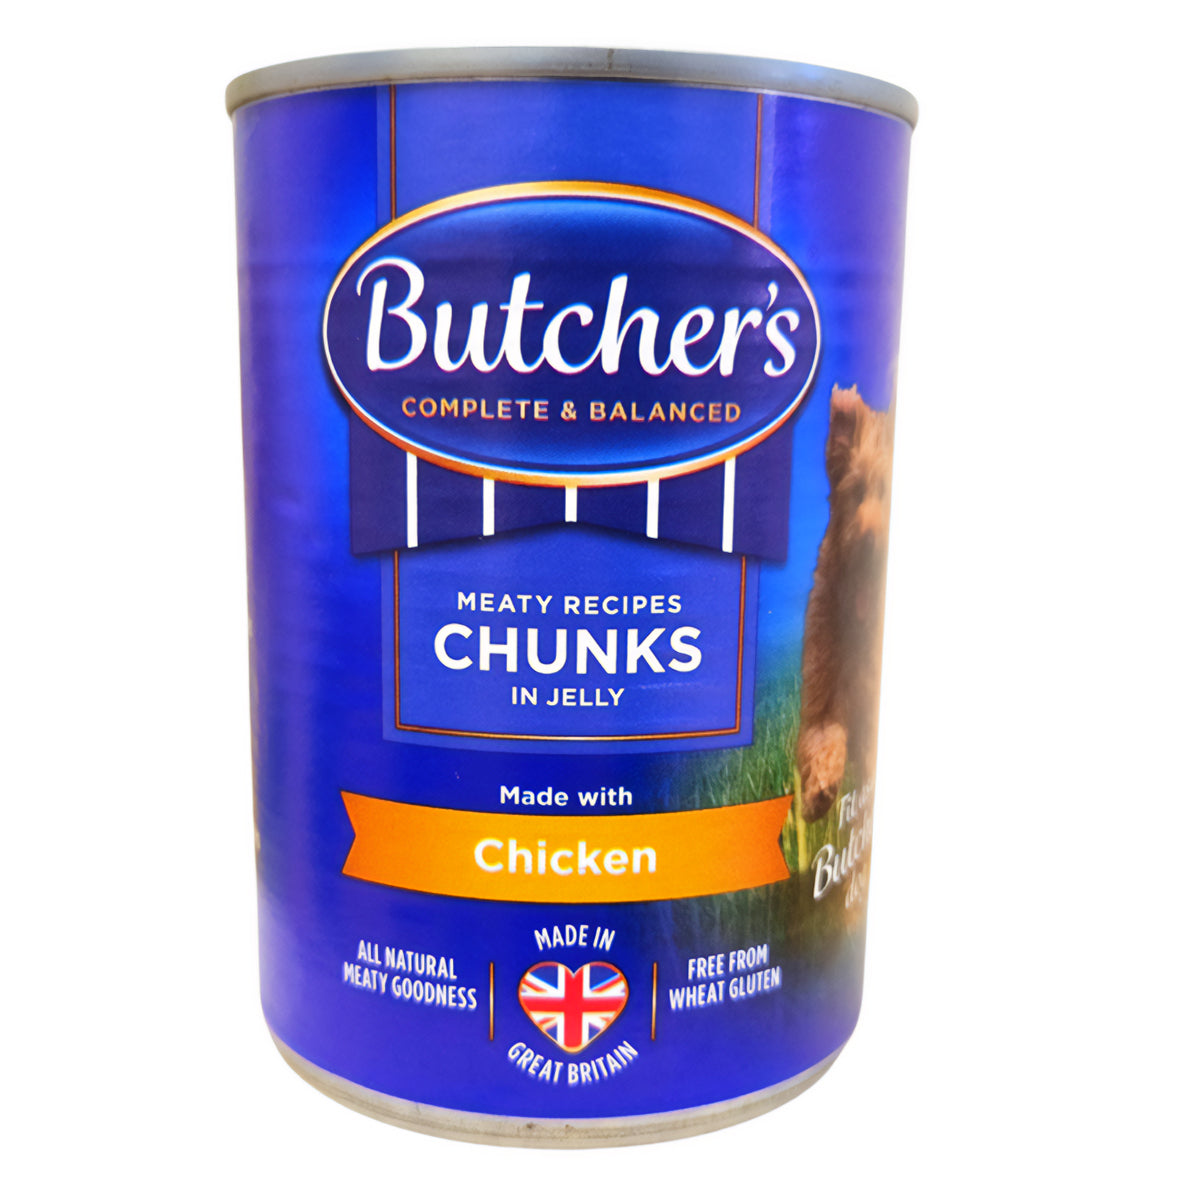 Butcher's - Chicken Chunks in Jelly - 400g in a can.